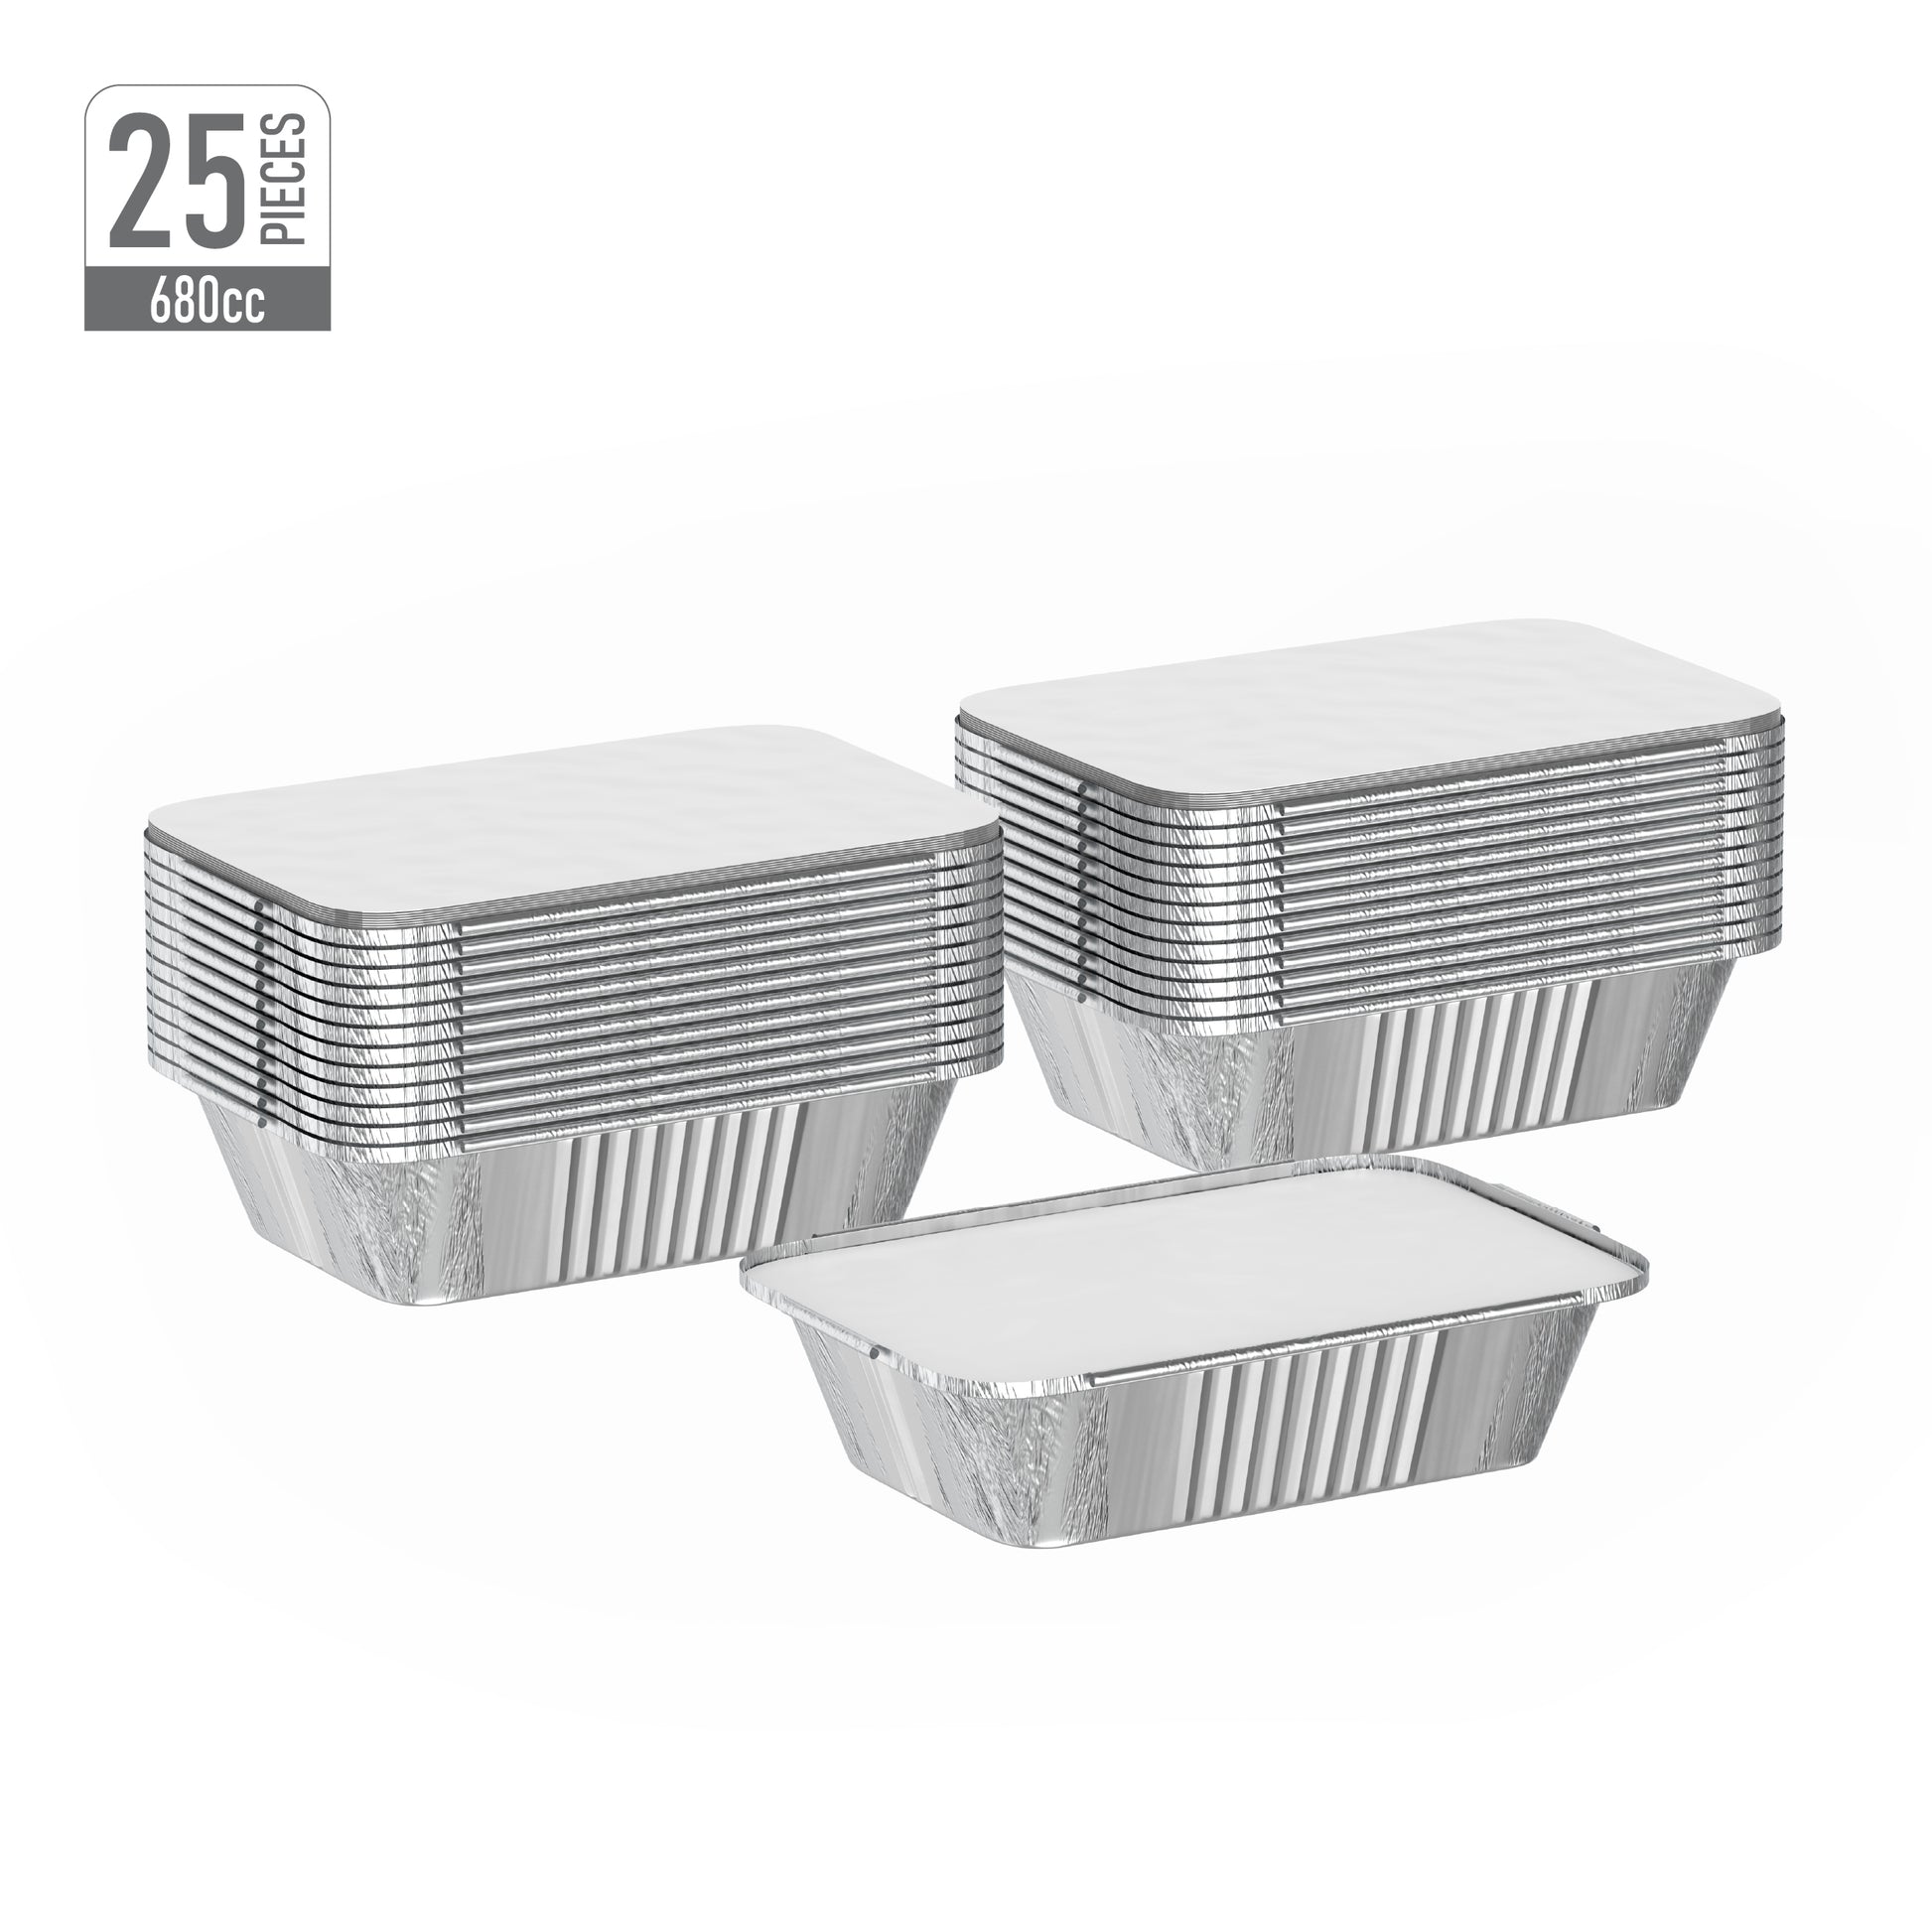 680 cc Pack of 25 Aluminium Containers with Lids